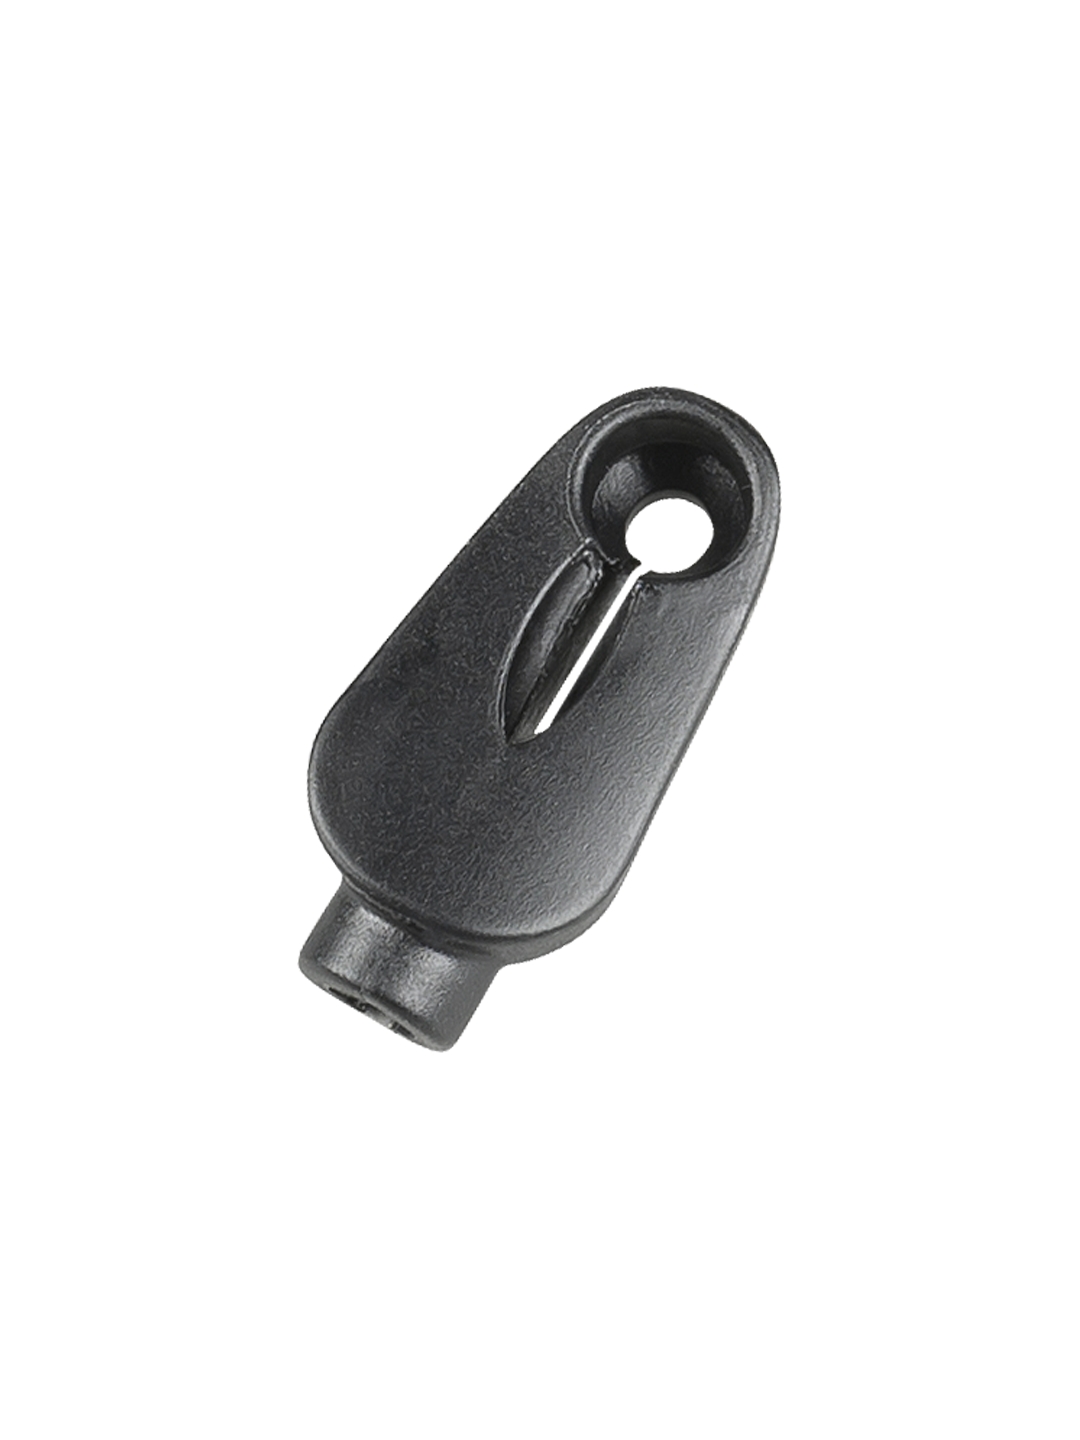 trek oval grommet cable guide